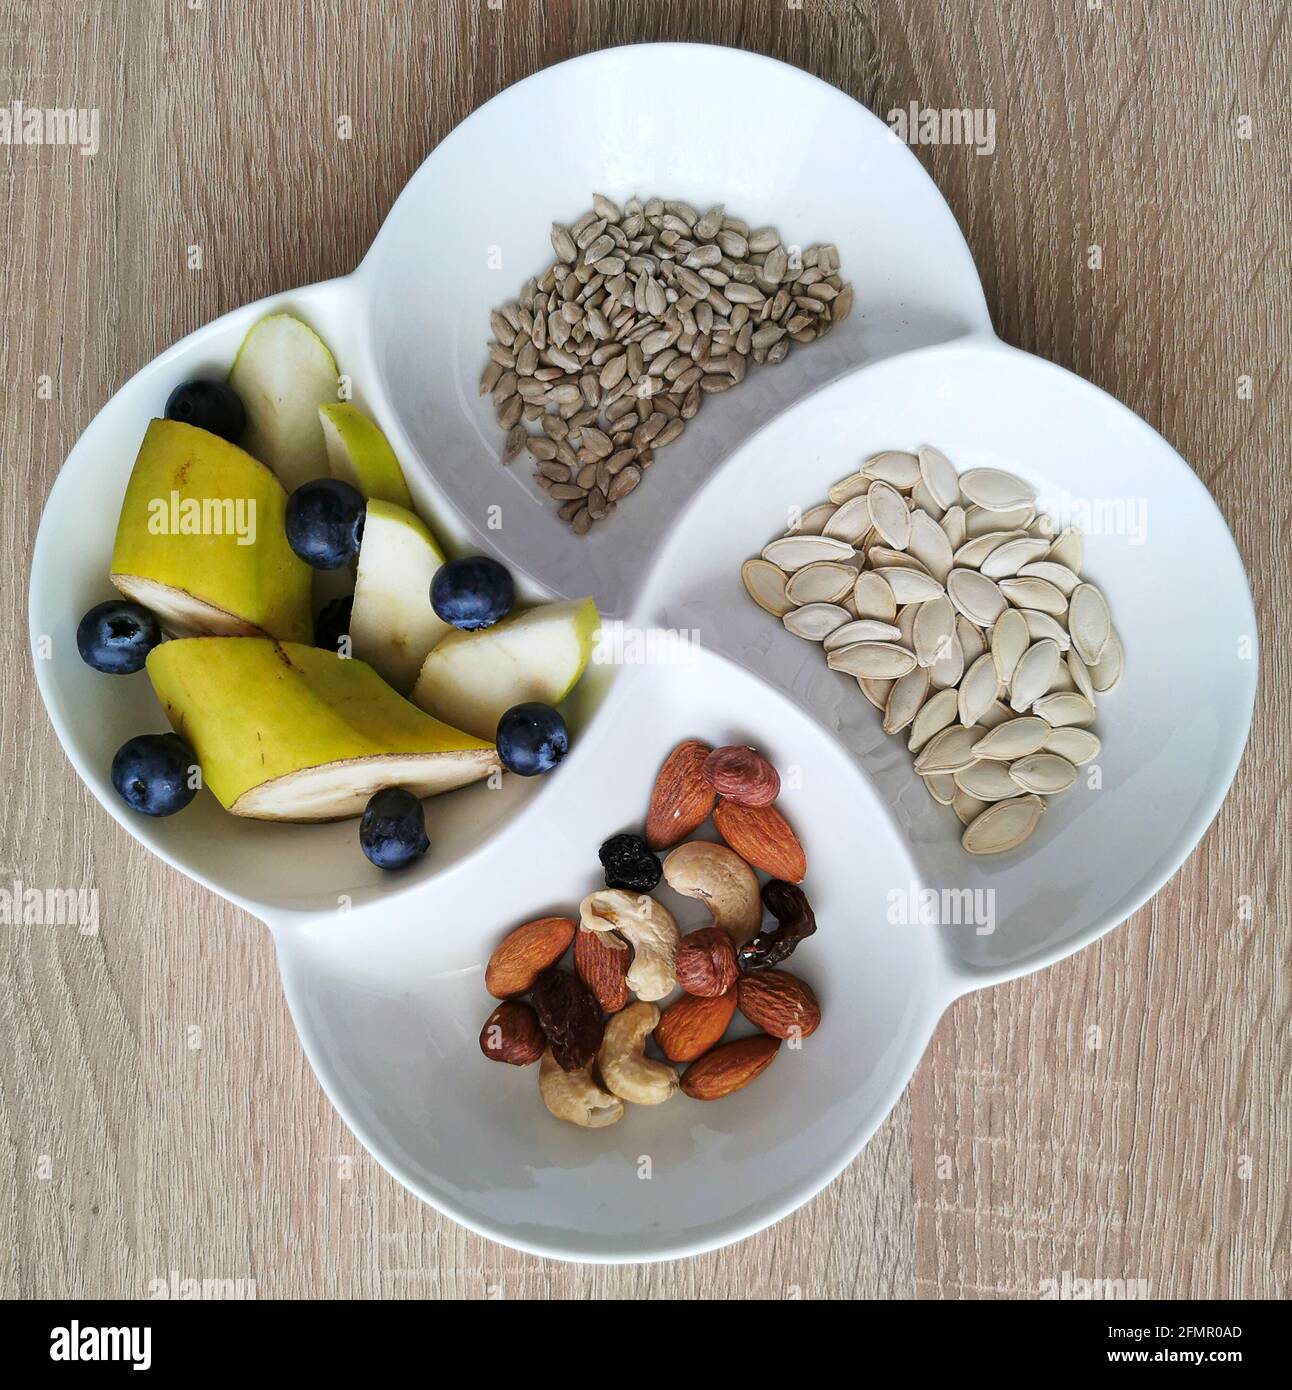 A healthy snack. Nuts, sunflower and pumpkin seeds. Banana pieces, apples and blueberries Stock Photo